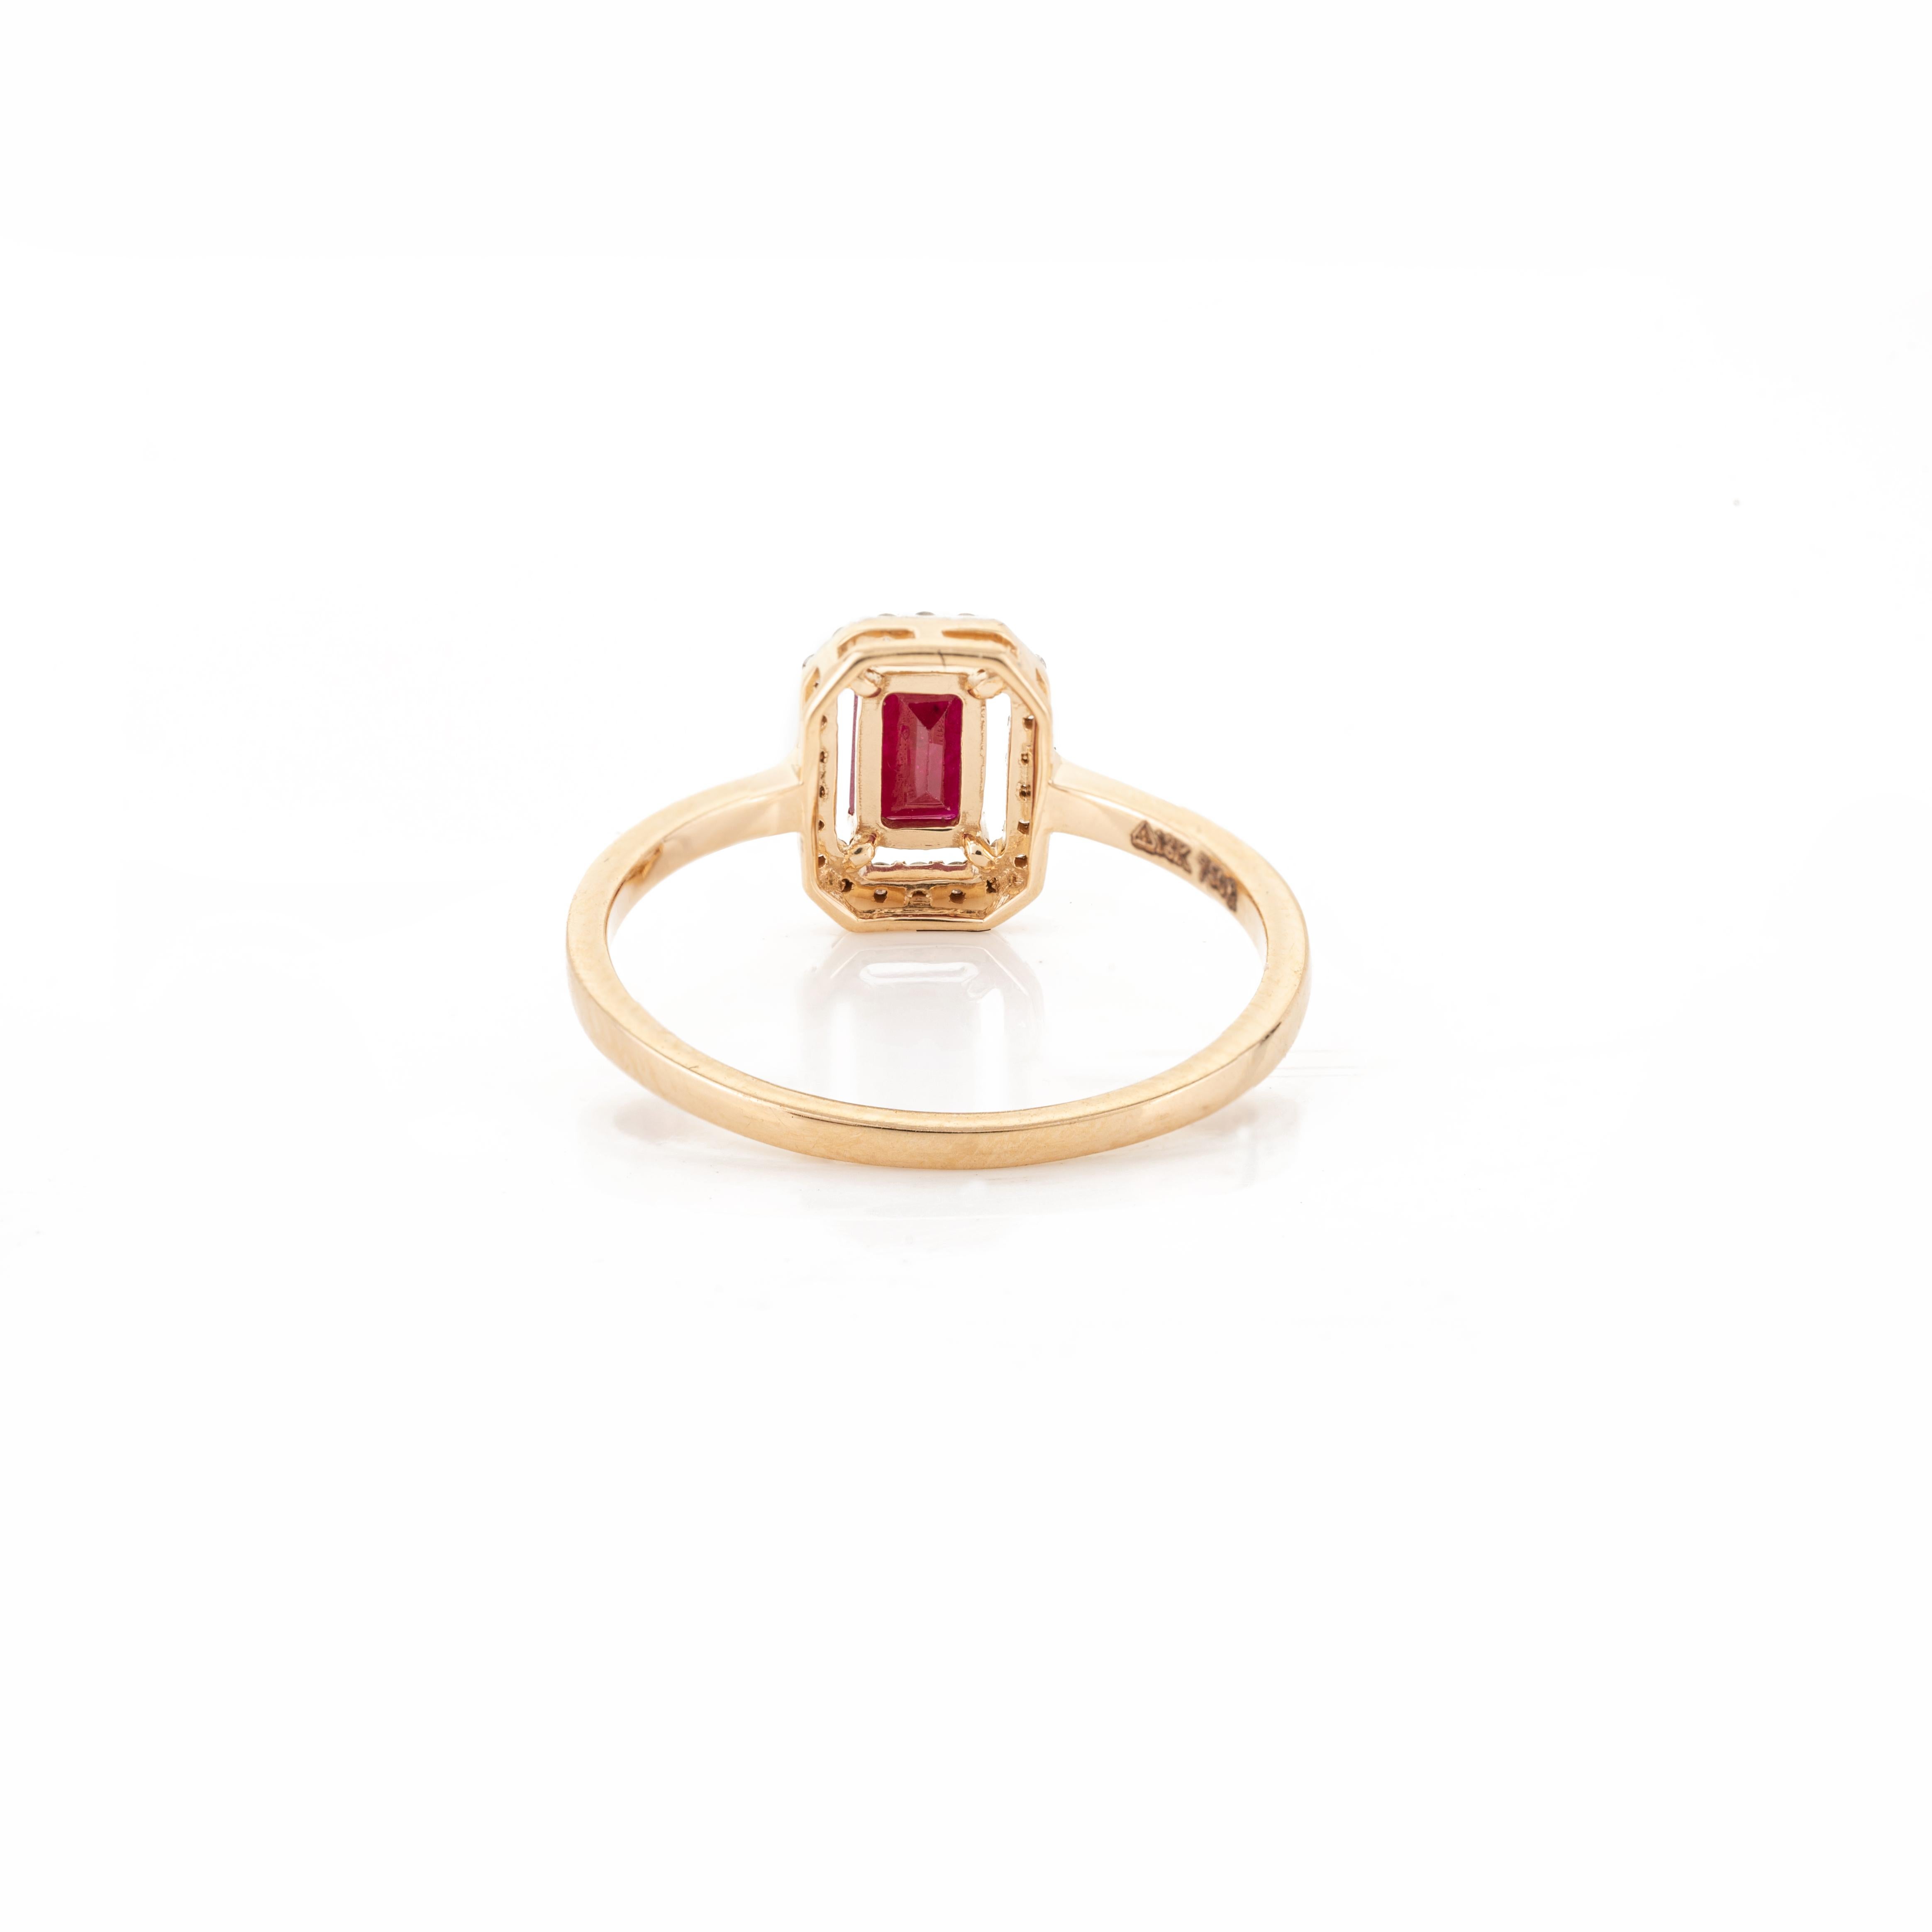 For Sale:  18k Yellow Gold Genuine Ruby Diamond Halo Anniversary Ring Gift for Women 6